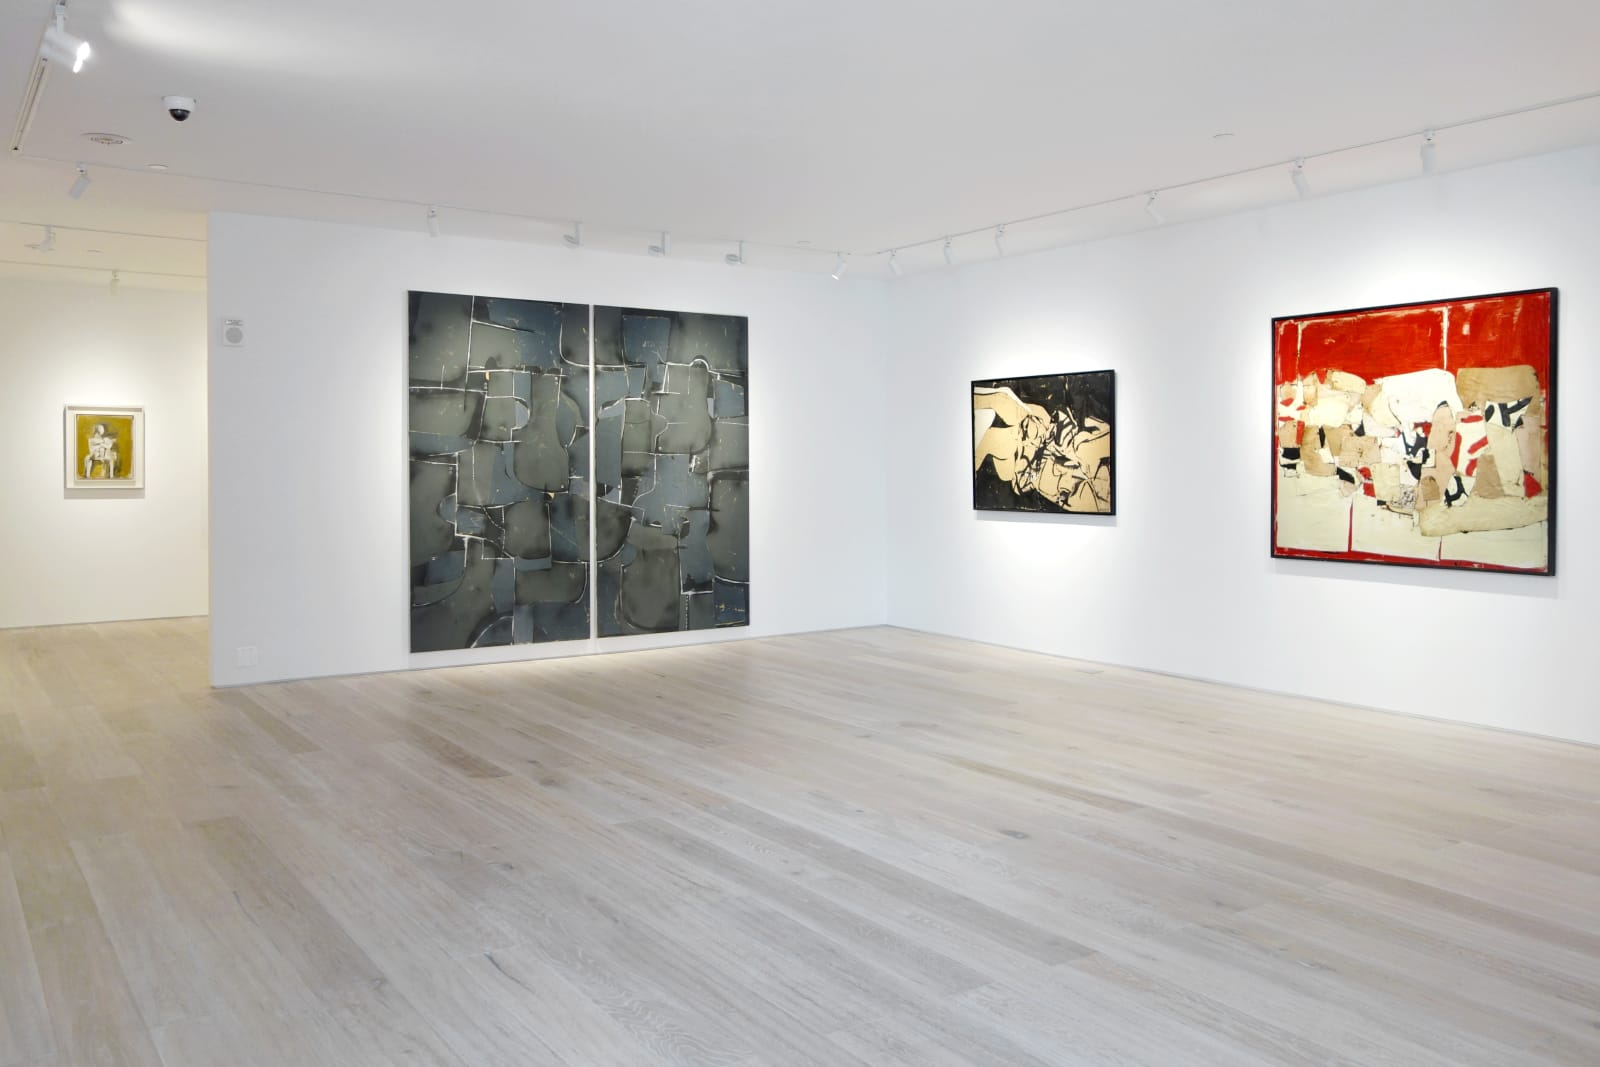 Hollis Taggart Galleries, 521 West 26th Street, 7th Floor, New York, NY (2015–2018)